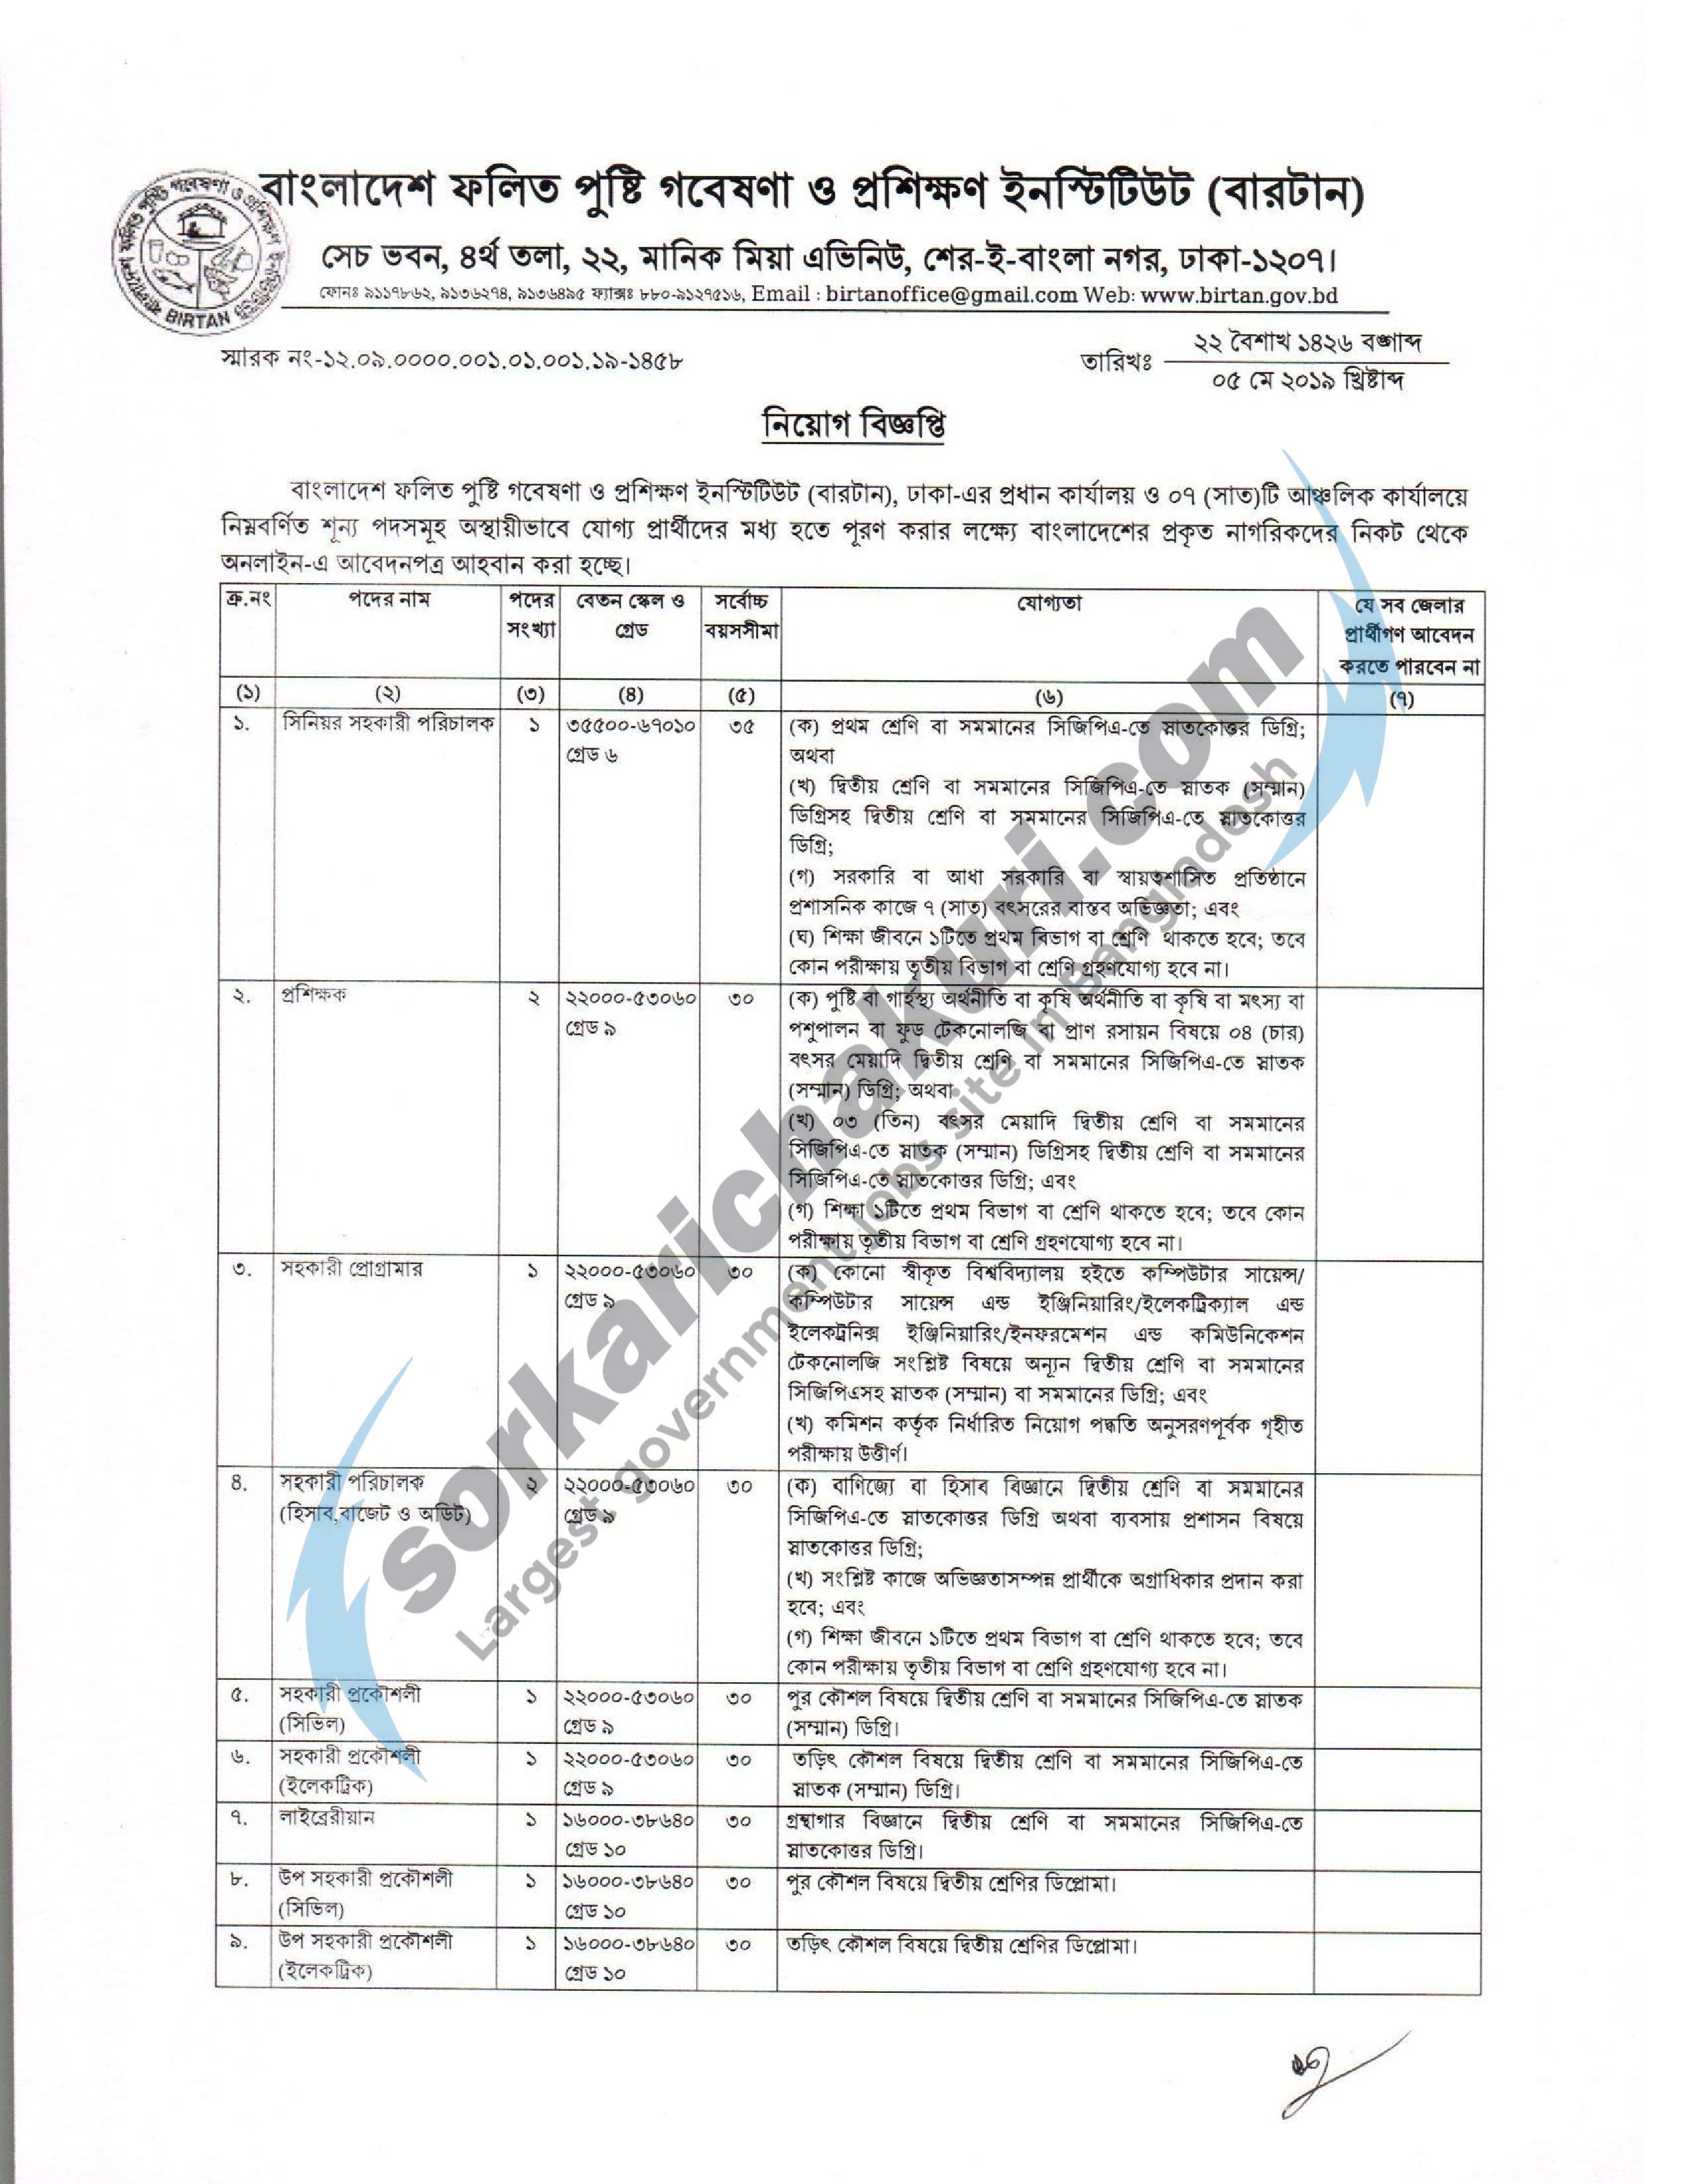 Bangladesh Institute of Research and Training on Applied Nutrition Jobs Circular 2019